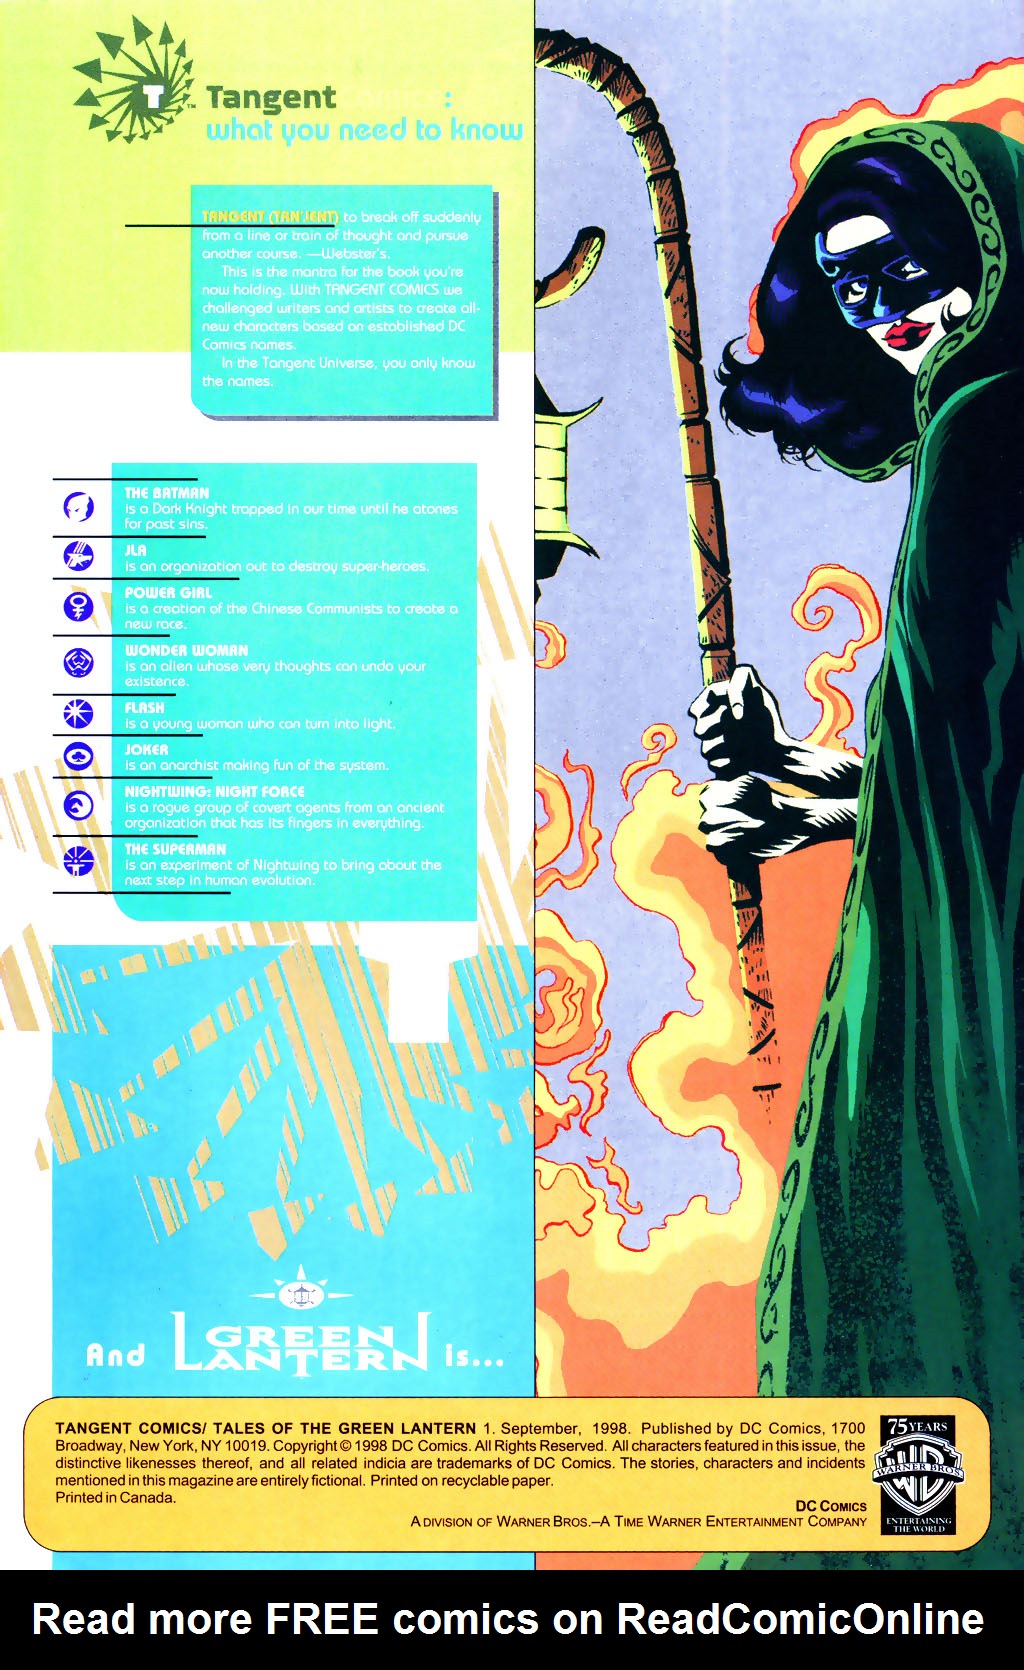 Read online Tangent Comics/ Tales of the Green Lantern comic -  Issue # Full - 2